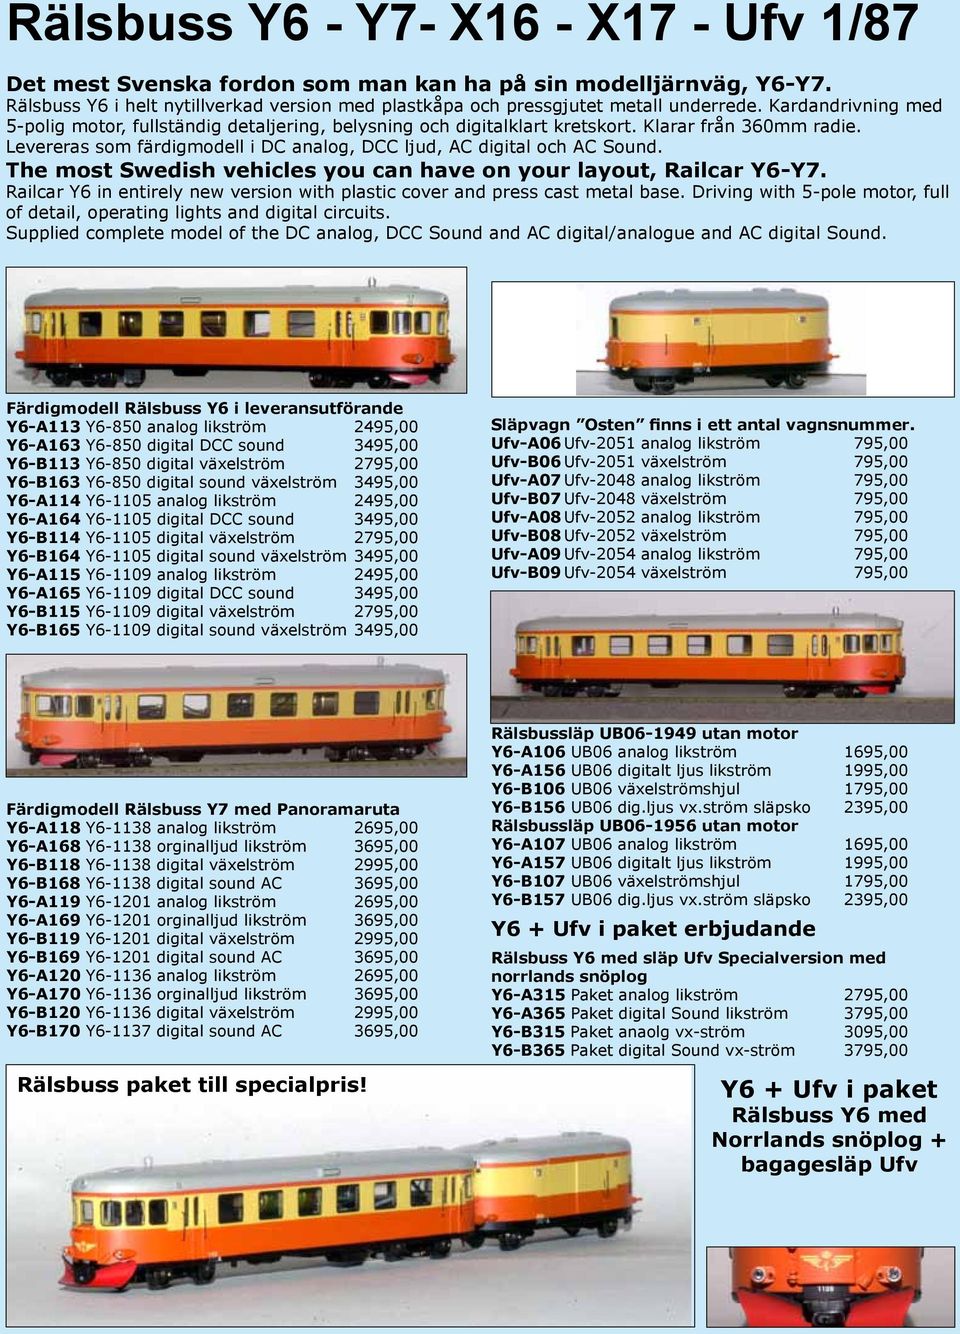 The most Swedish vehicles you can have on your layout, Railcar Y6-Y7. Railcar Y6 in entirely new version with plastic cover and press cast metal base.